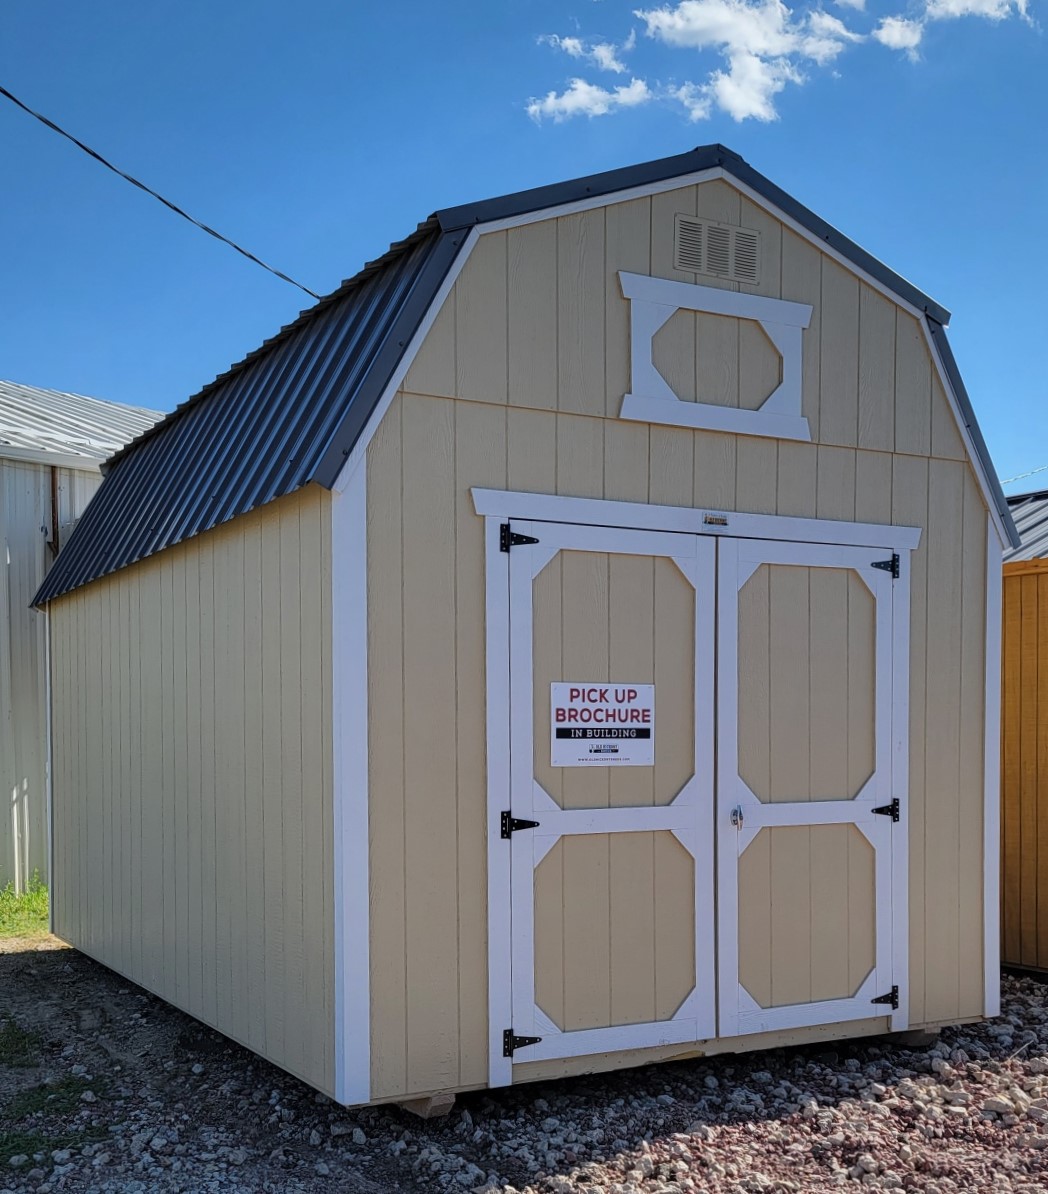 Buy Now: 10x16 Painted Lofted Barn Shed beige with white trim or custom order at French Creek Designs Shed Sales, Casper, WY